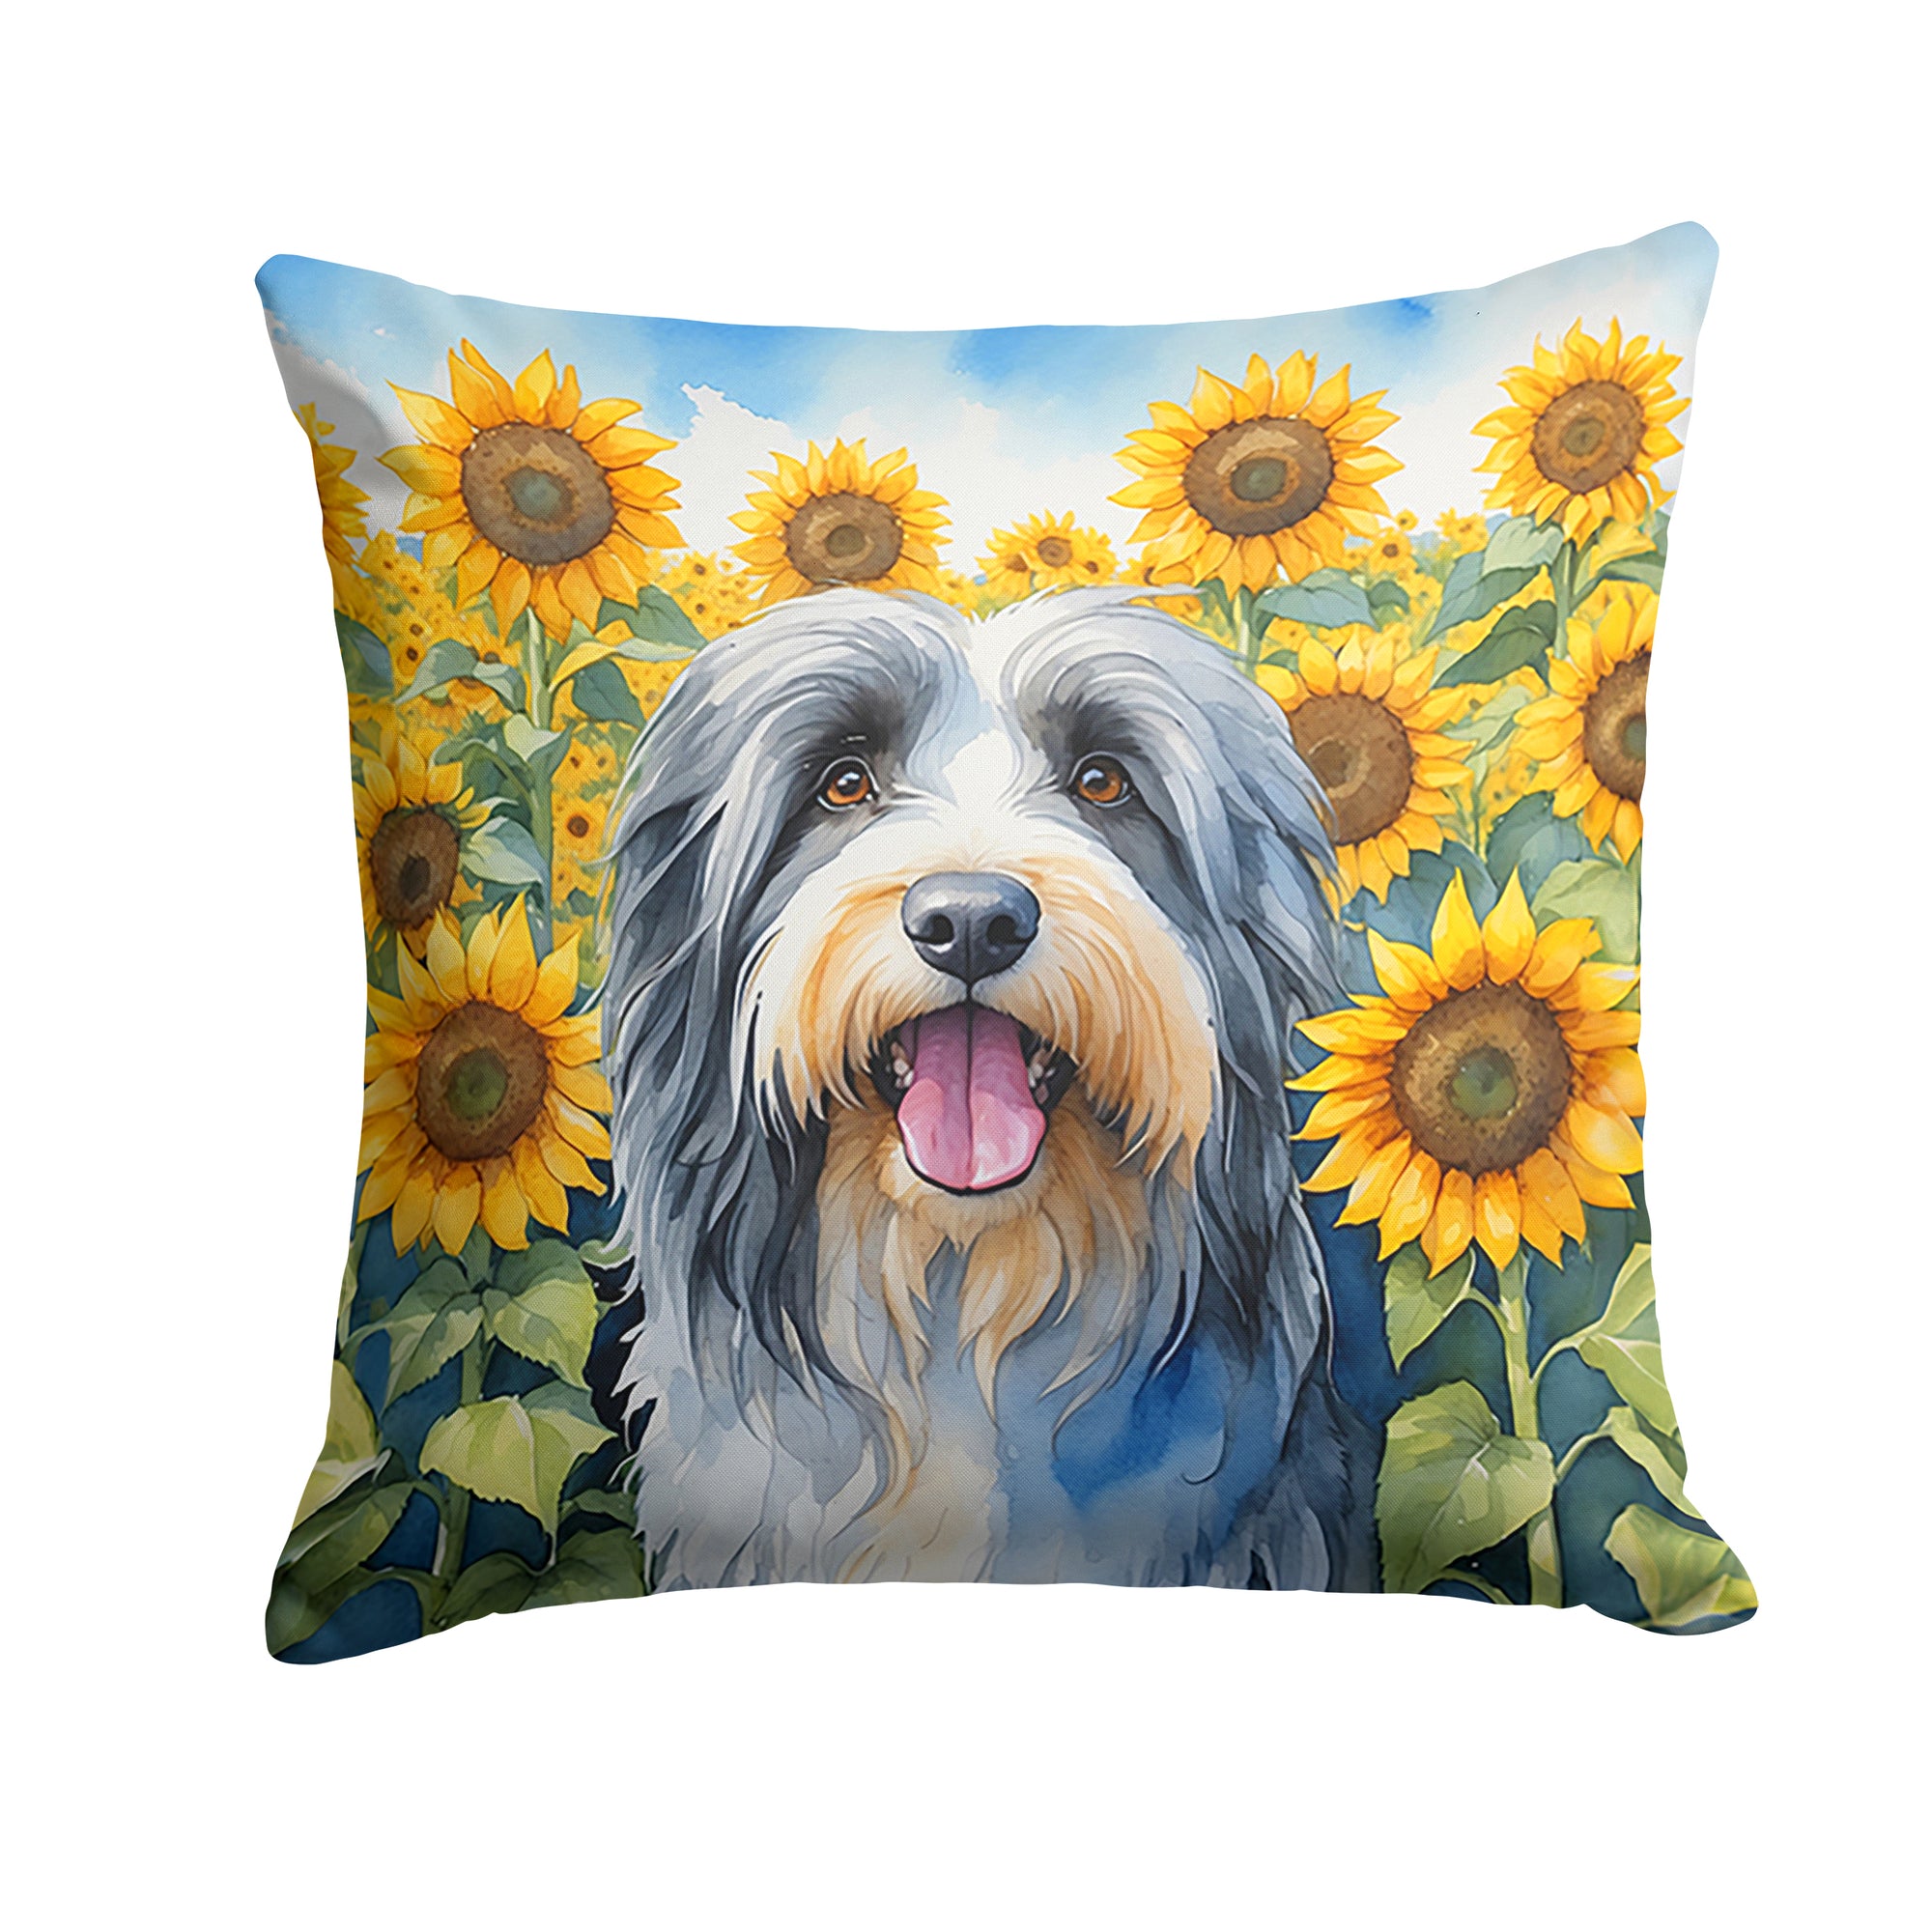 Buy this Bearded Collie in Sunflowers Throw Pillow